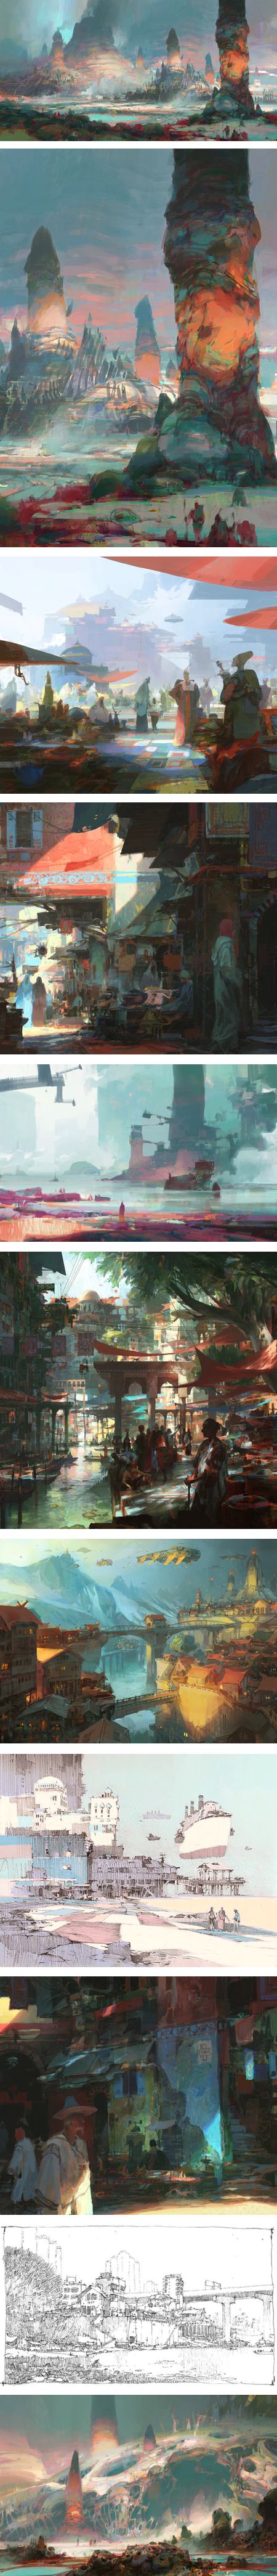 Concept art by Theo Prins